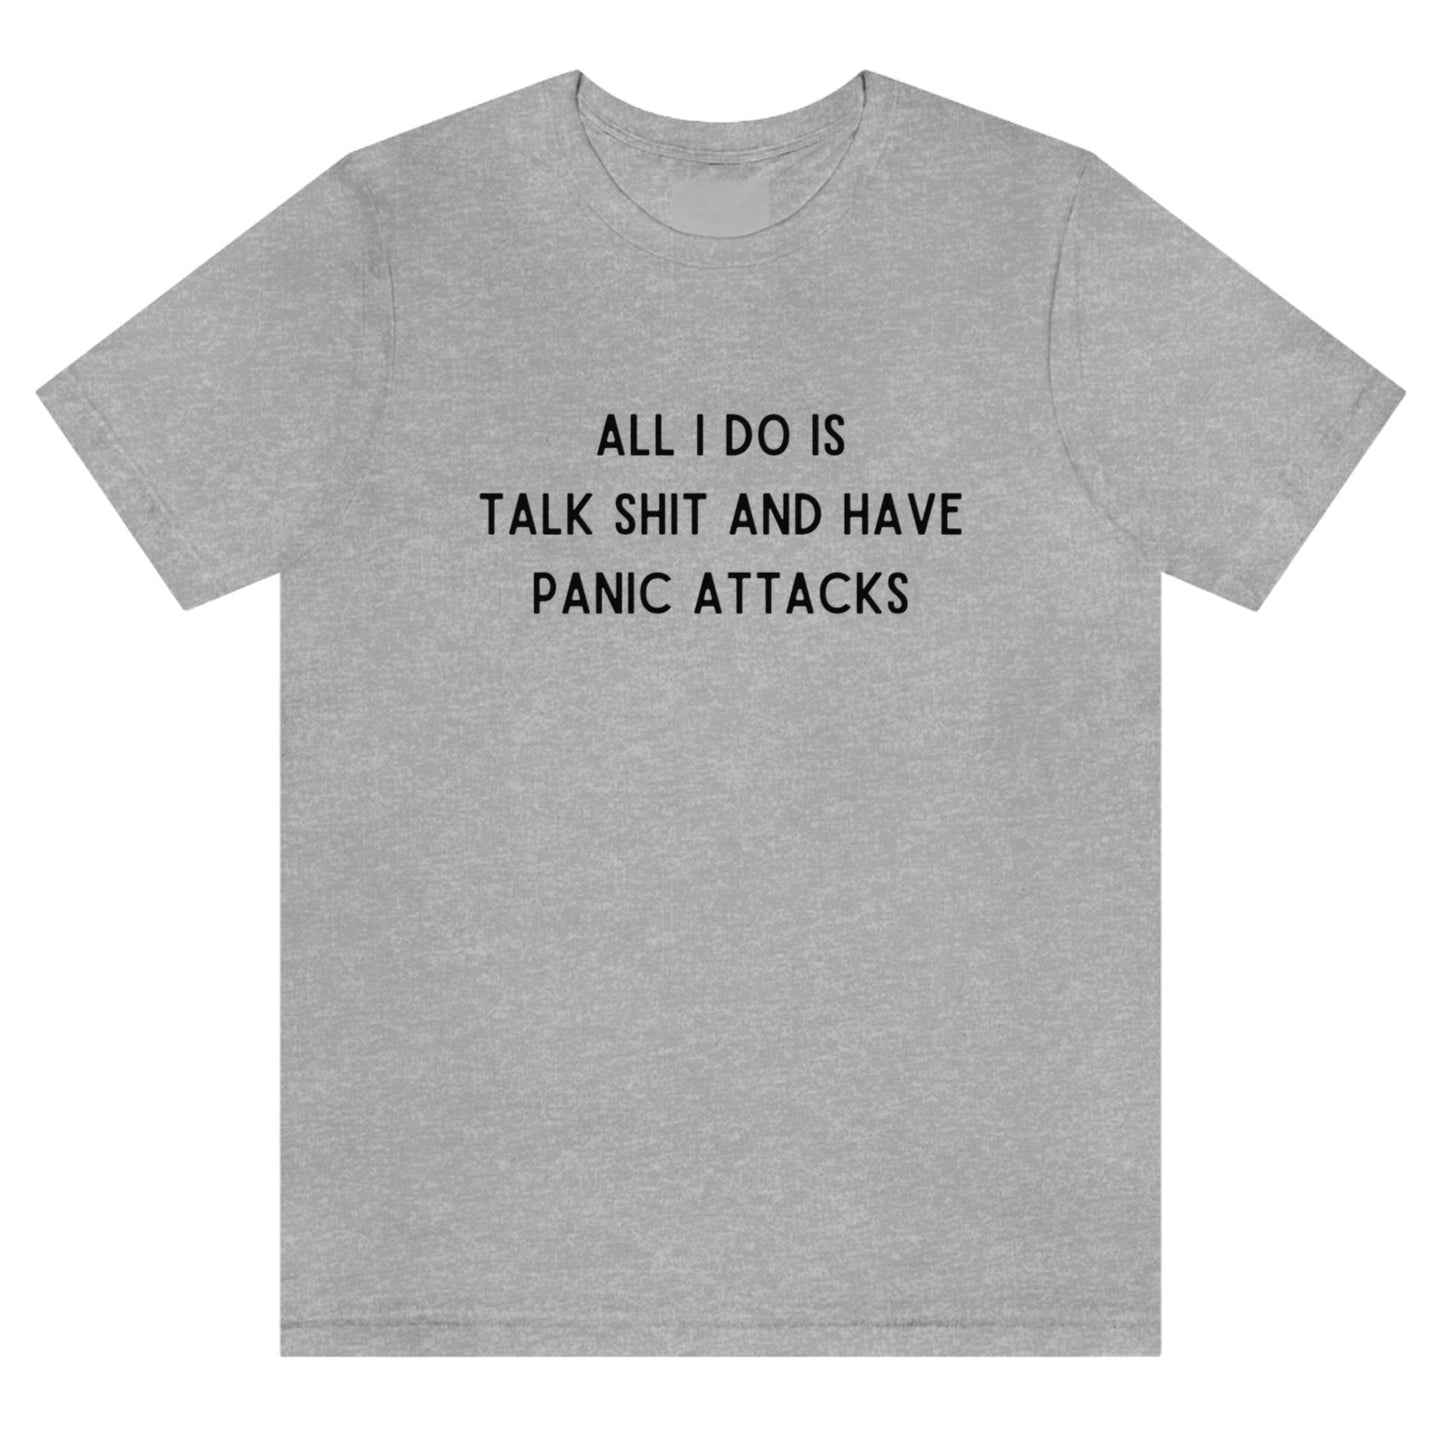 all-i-do-is-talk-shit-and-have-panic-attacks-athletic-heather-t-shirt-funny-unisex